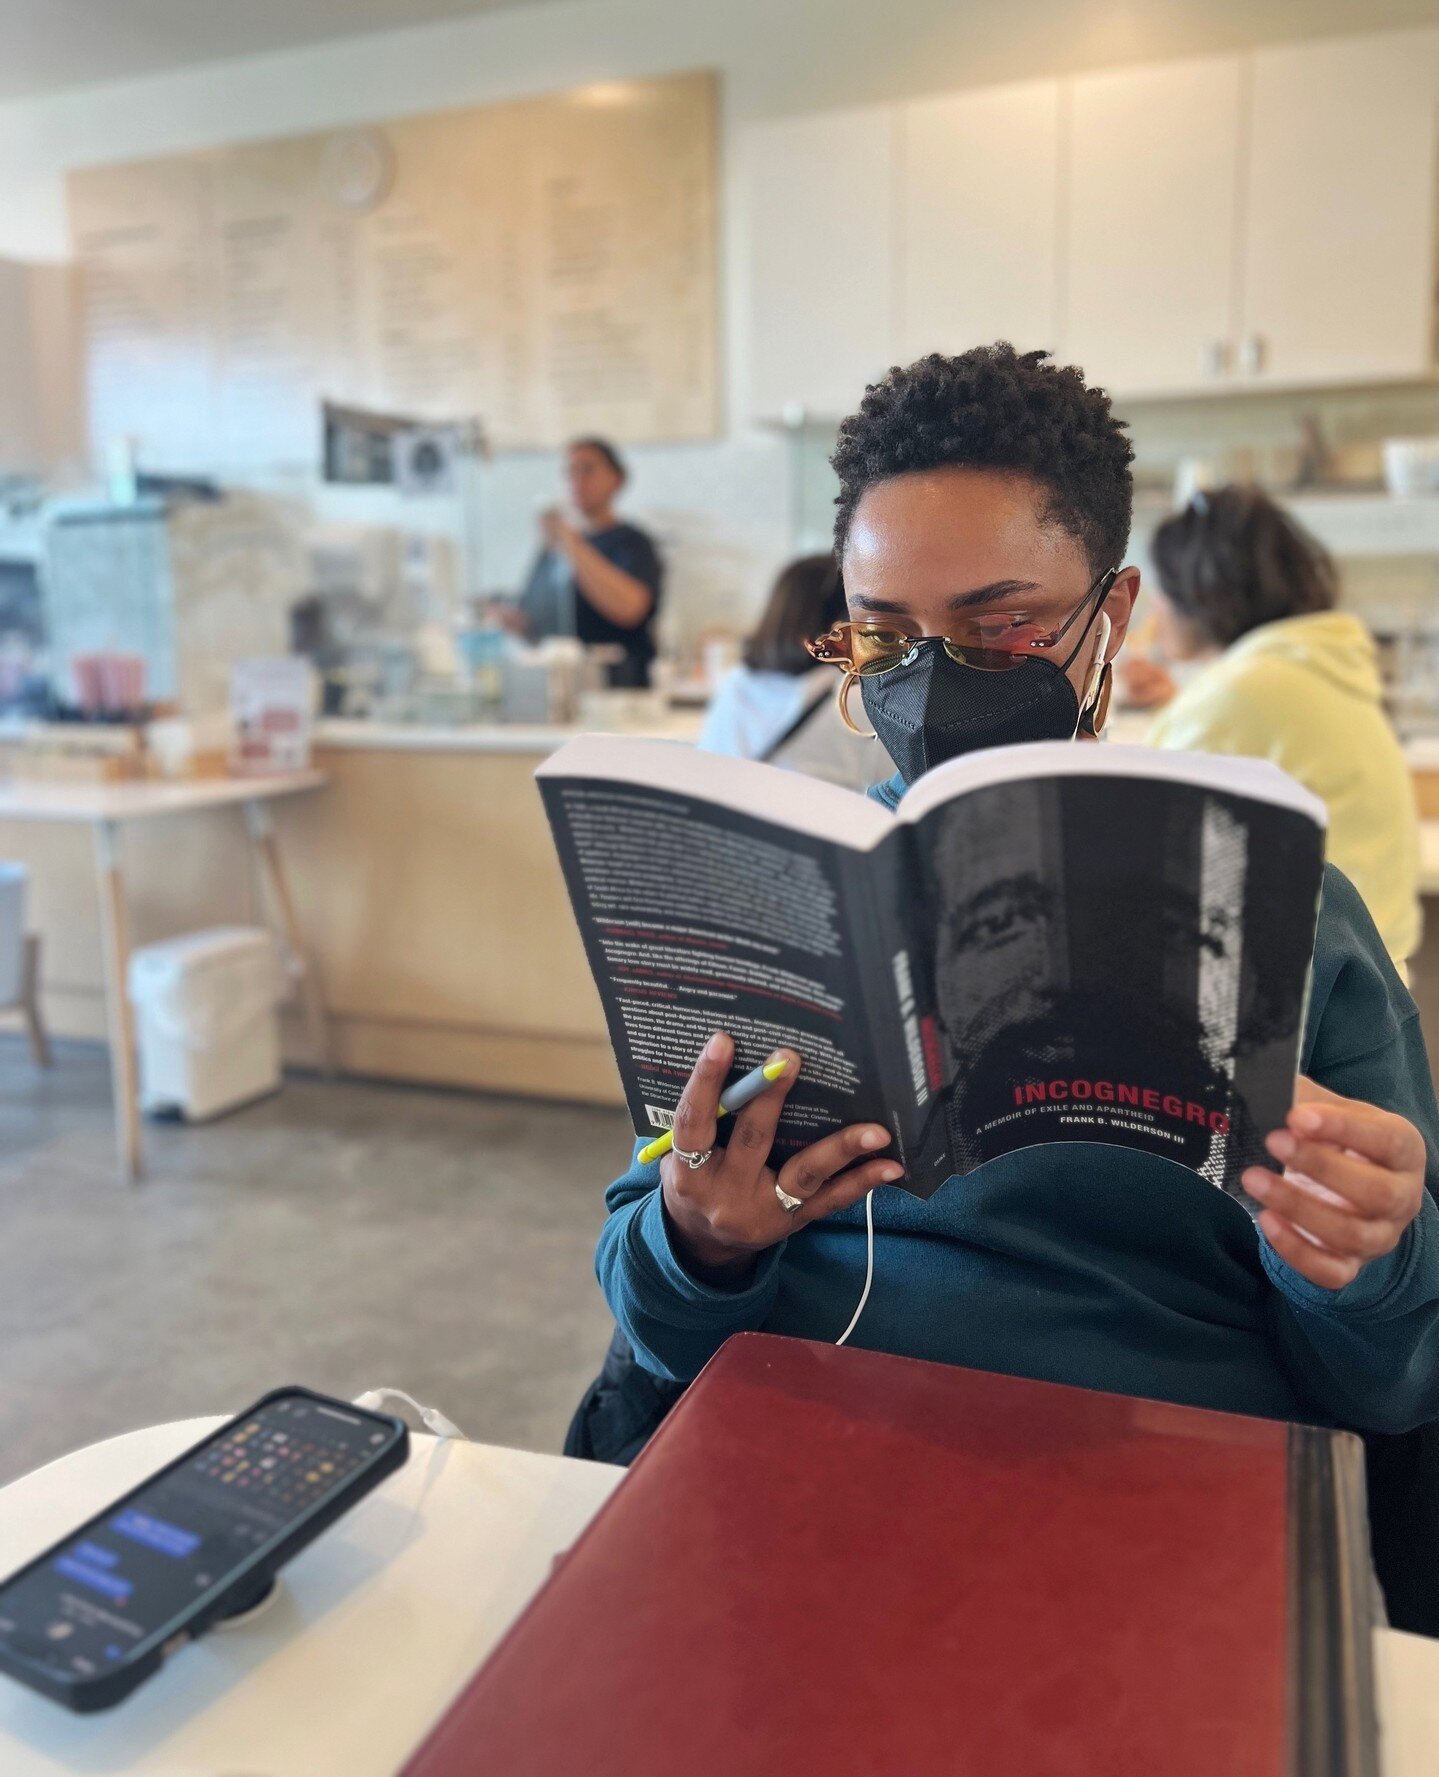 Focused.⁠
⁠
[Read a full description of this book at the PAGES Trg Bookshop link in our bio]⁠
⁠
Book: Incognegro by Frank Wilderson III⁠
Shelves: @Nannearl_⁠
Tempo: Moderate/Fast⁠
Level: Intermediate⁠
⁠
#Books #Earlreads #weekendread #Afropessimism